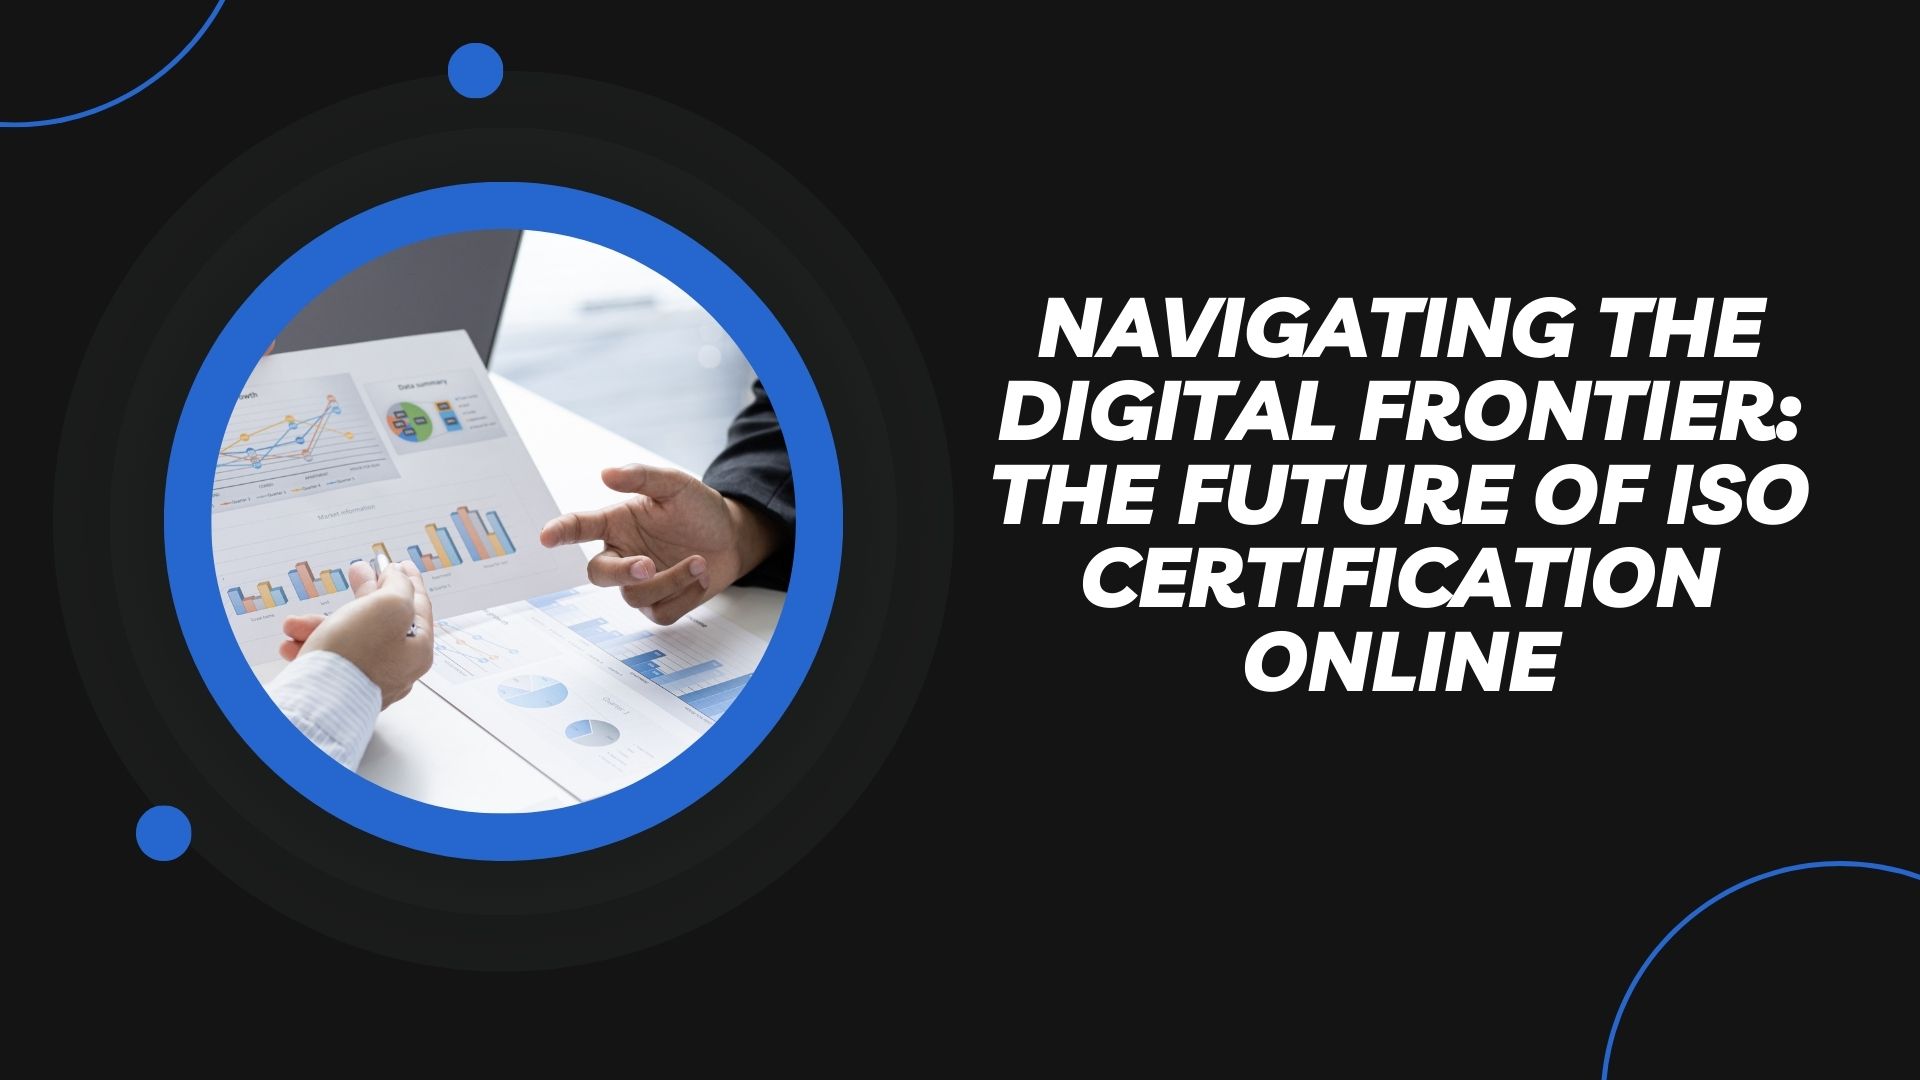 Navigating the Digital Frontier: The Future of ISO Certification Online